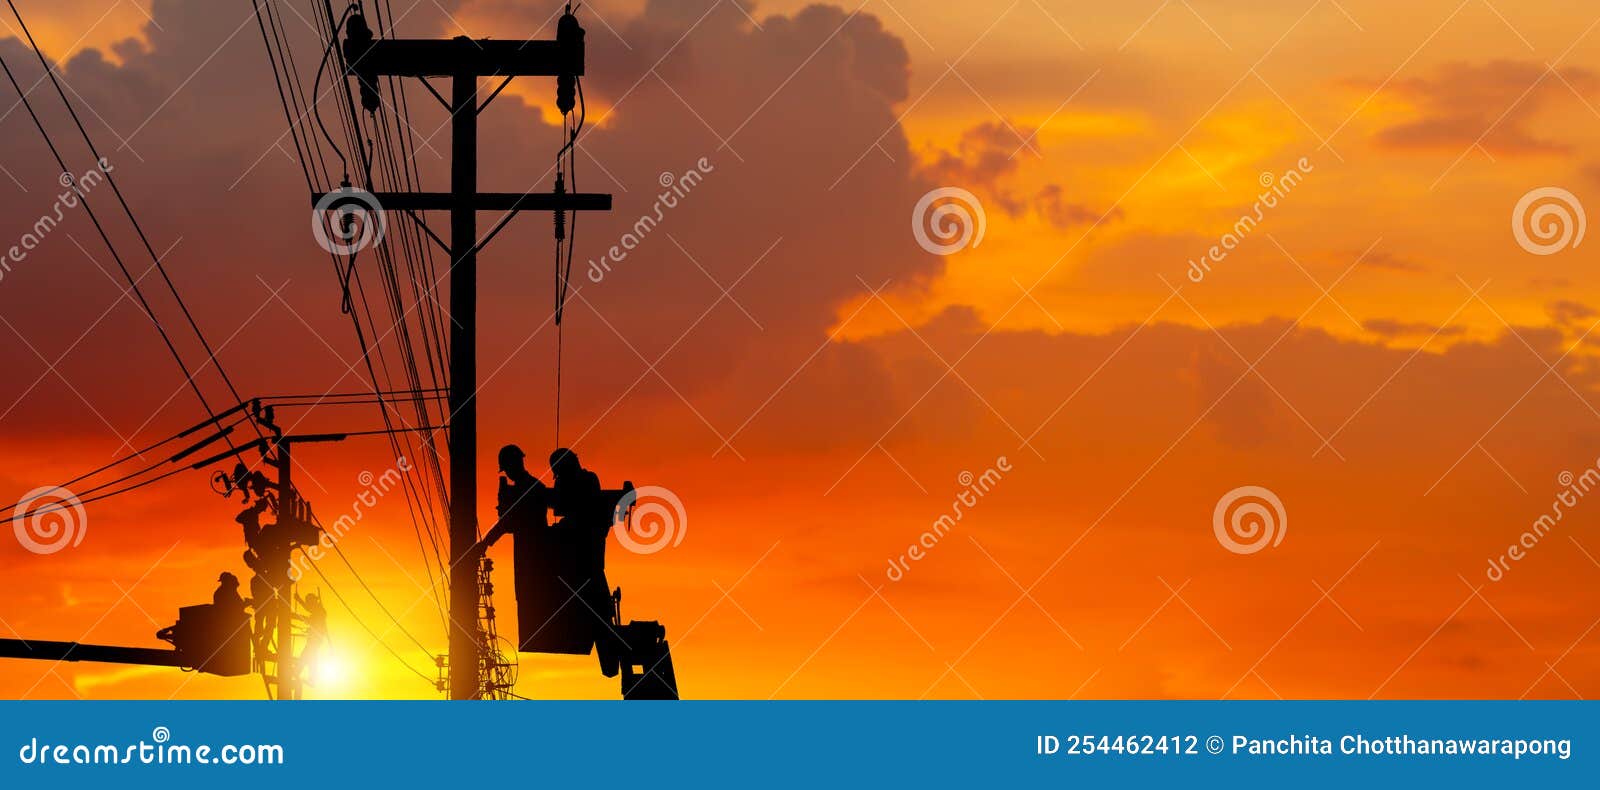 Silhouette of Electrician Officer Climbs a Pole and Uses a Cable